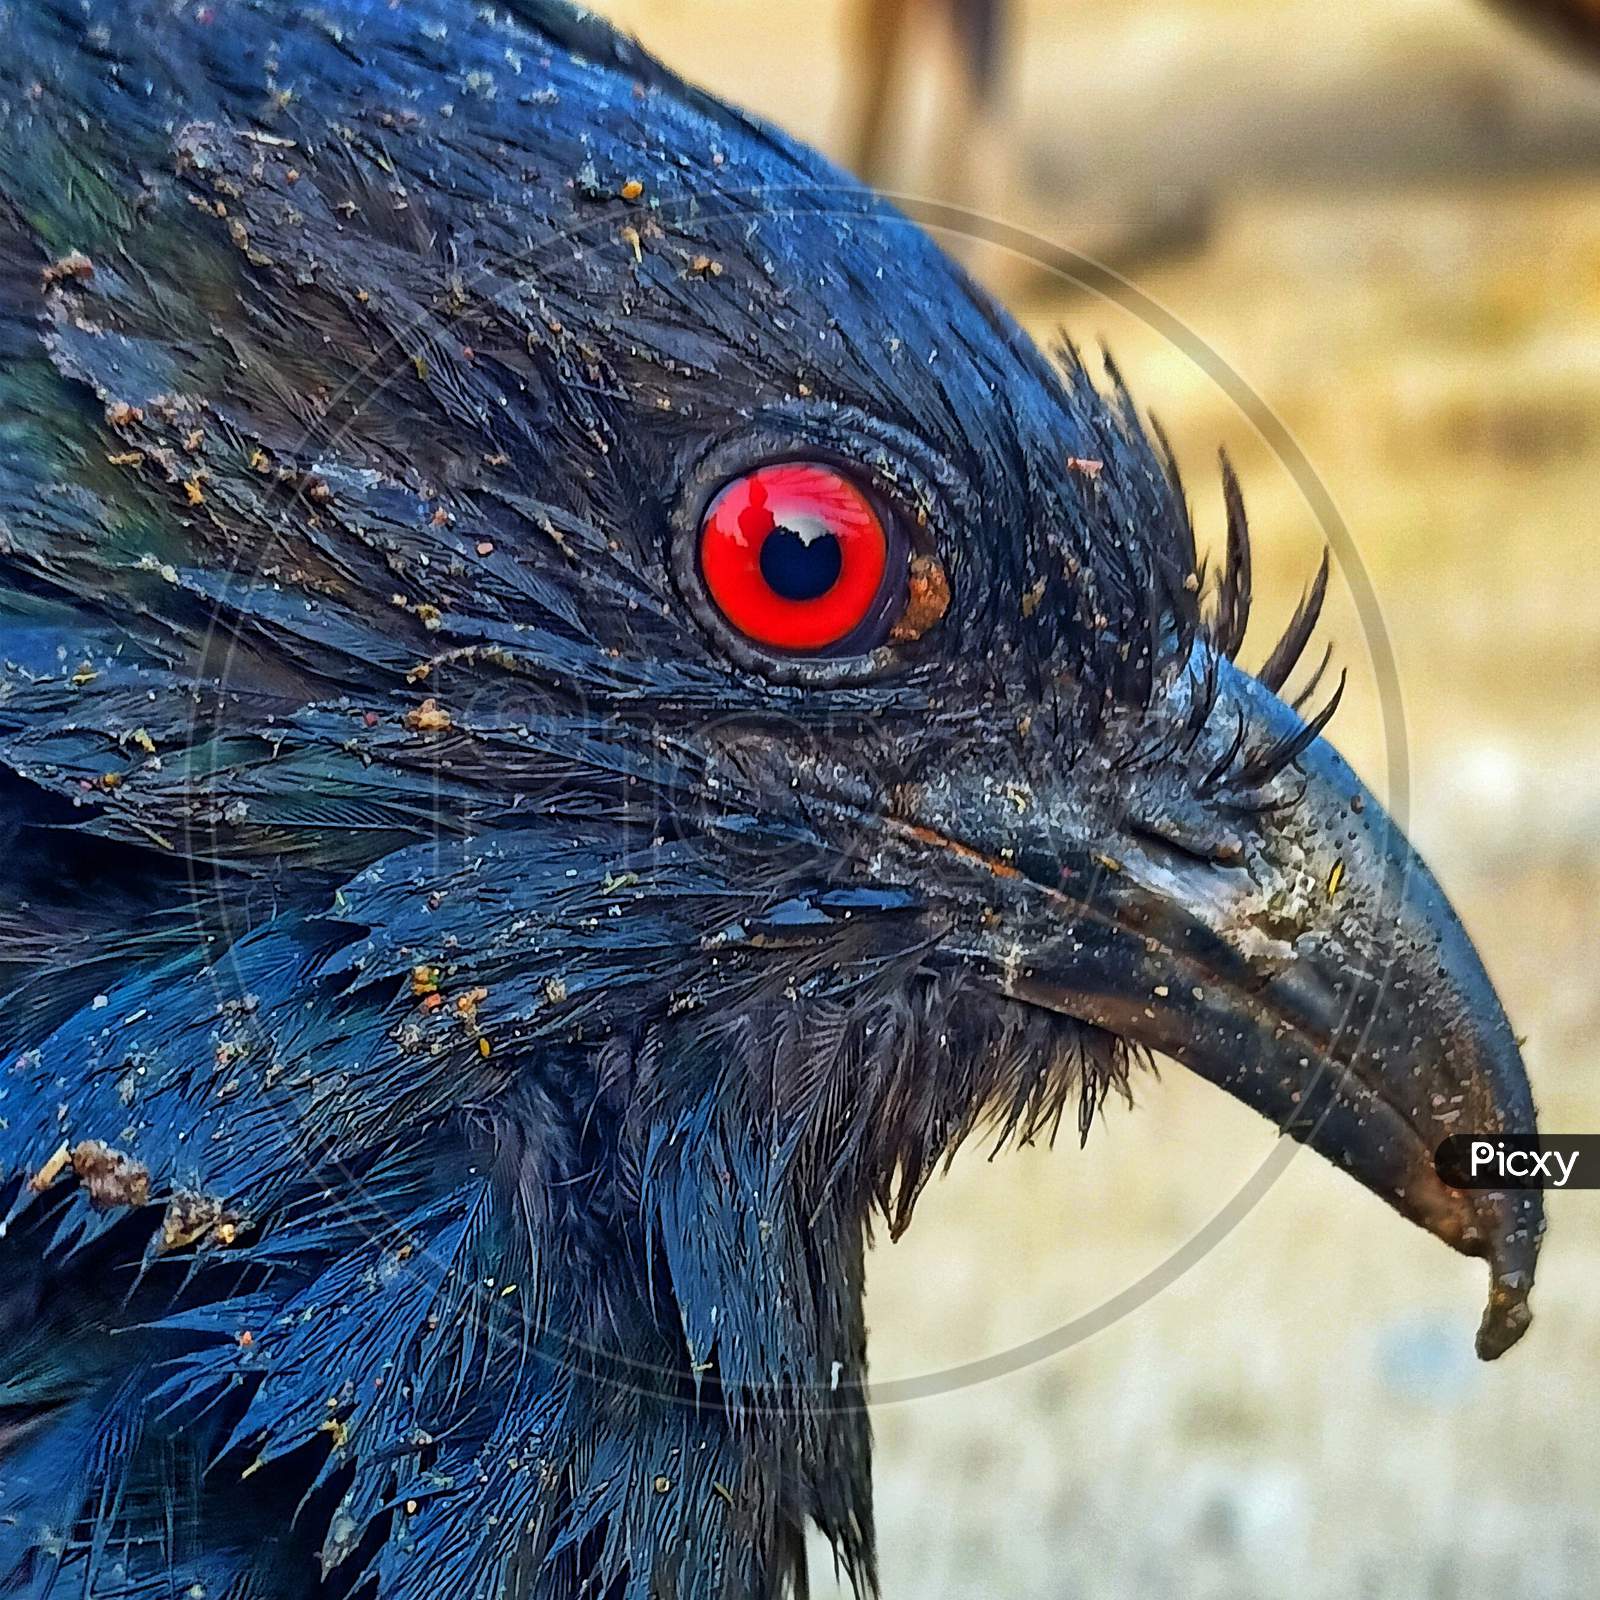 Pheasant crow with a red eye